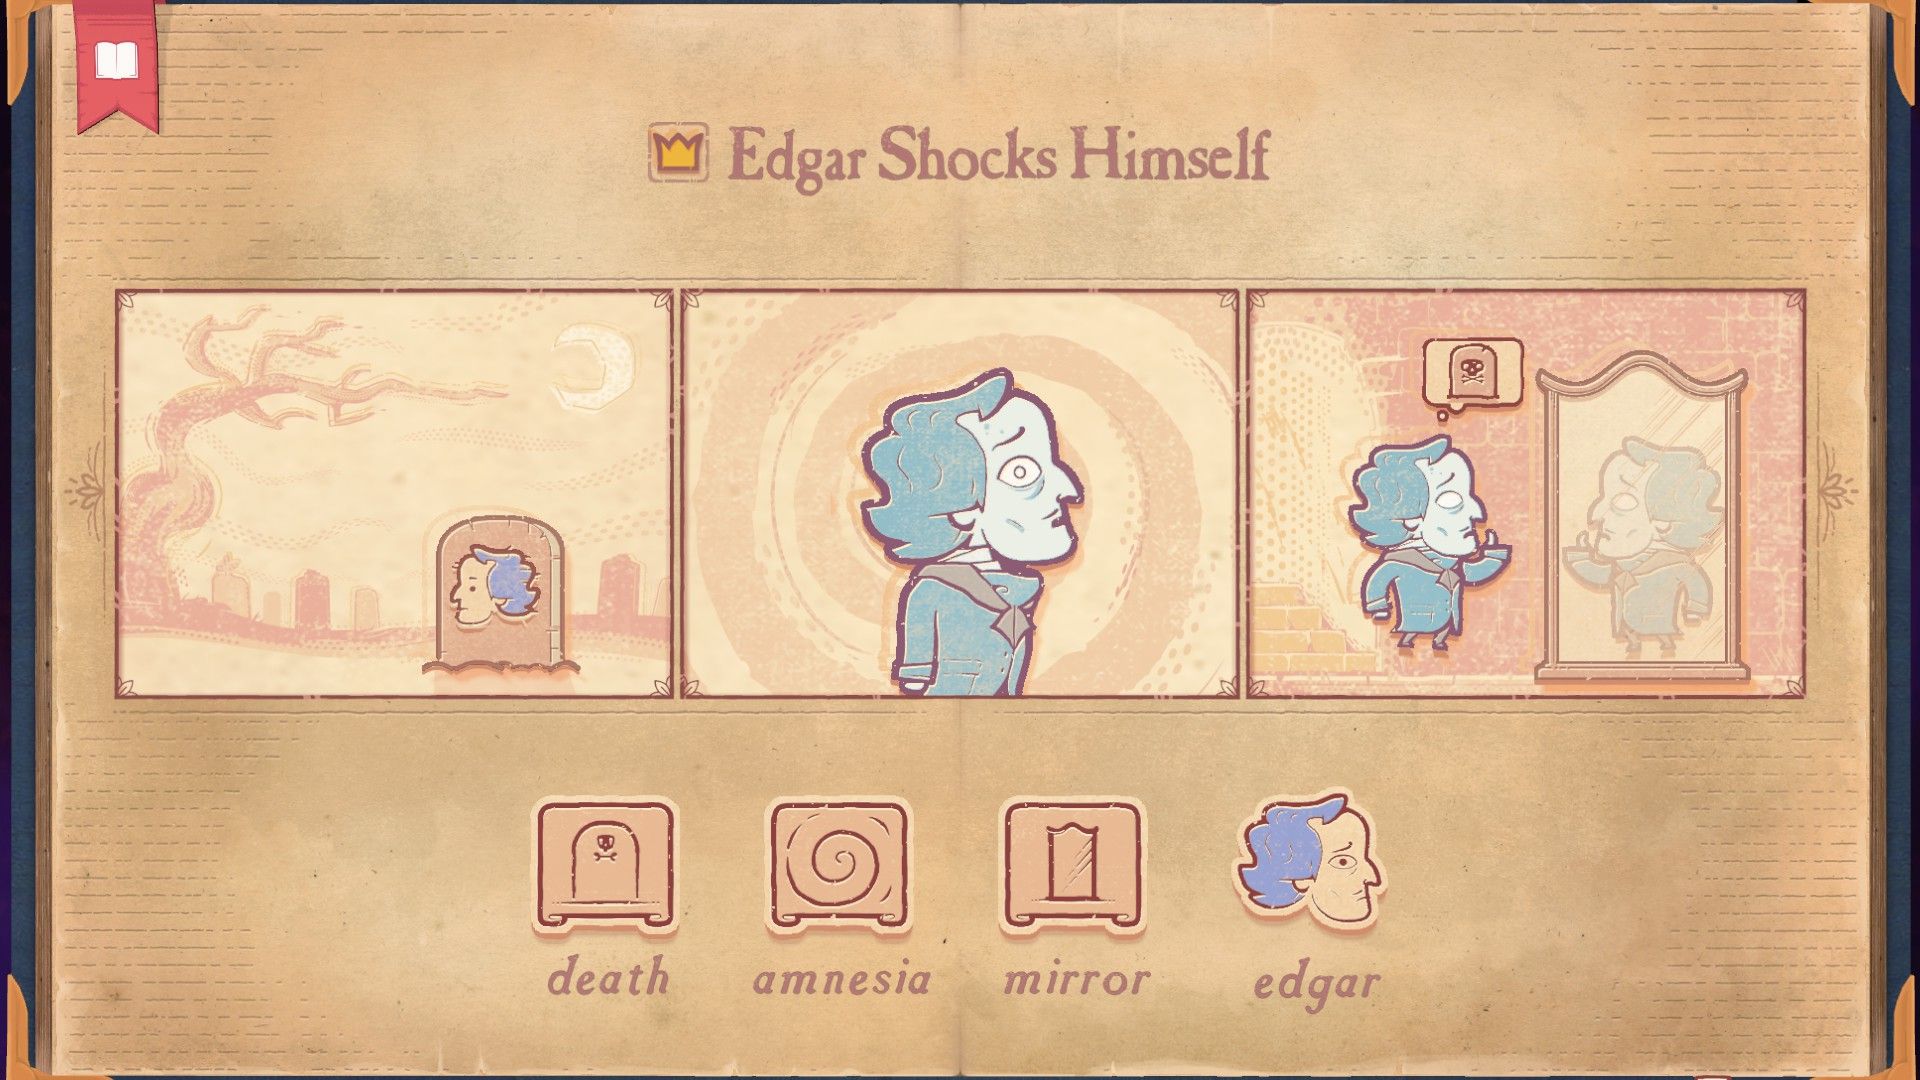 The solution for the Revelation section of Stoyteller, showing Edgar reacting to his death.